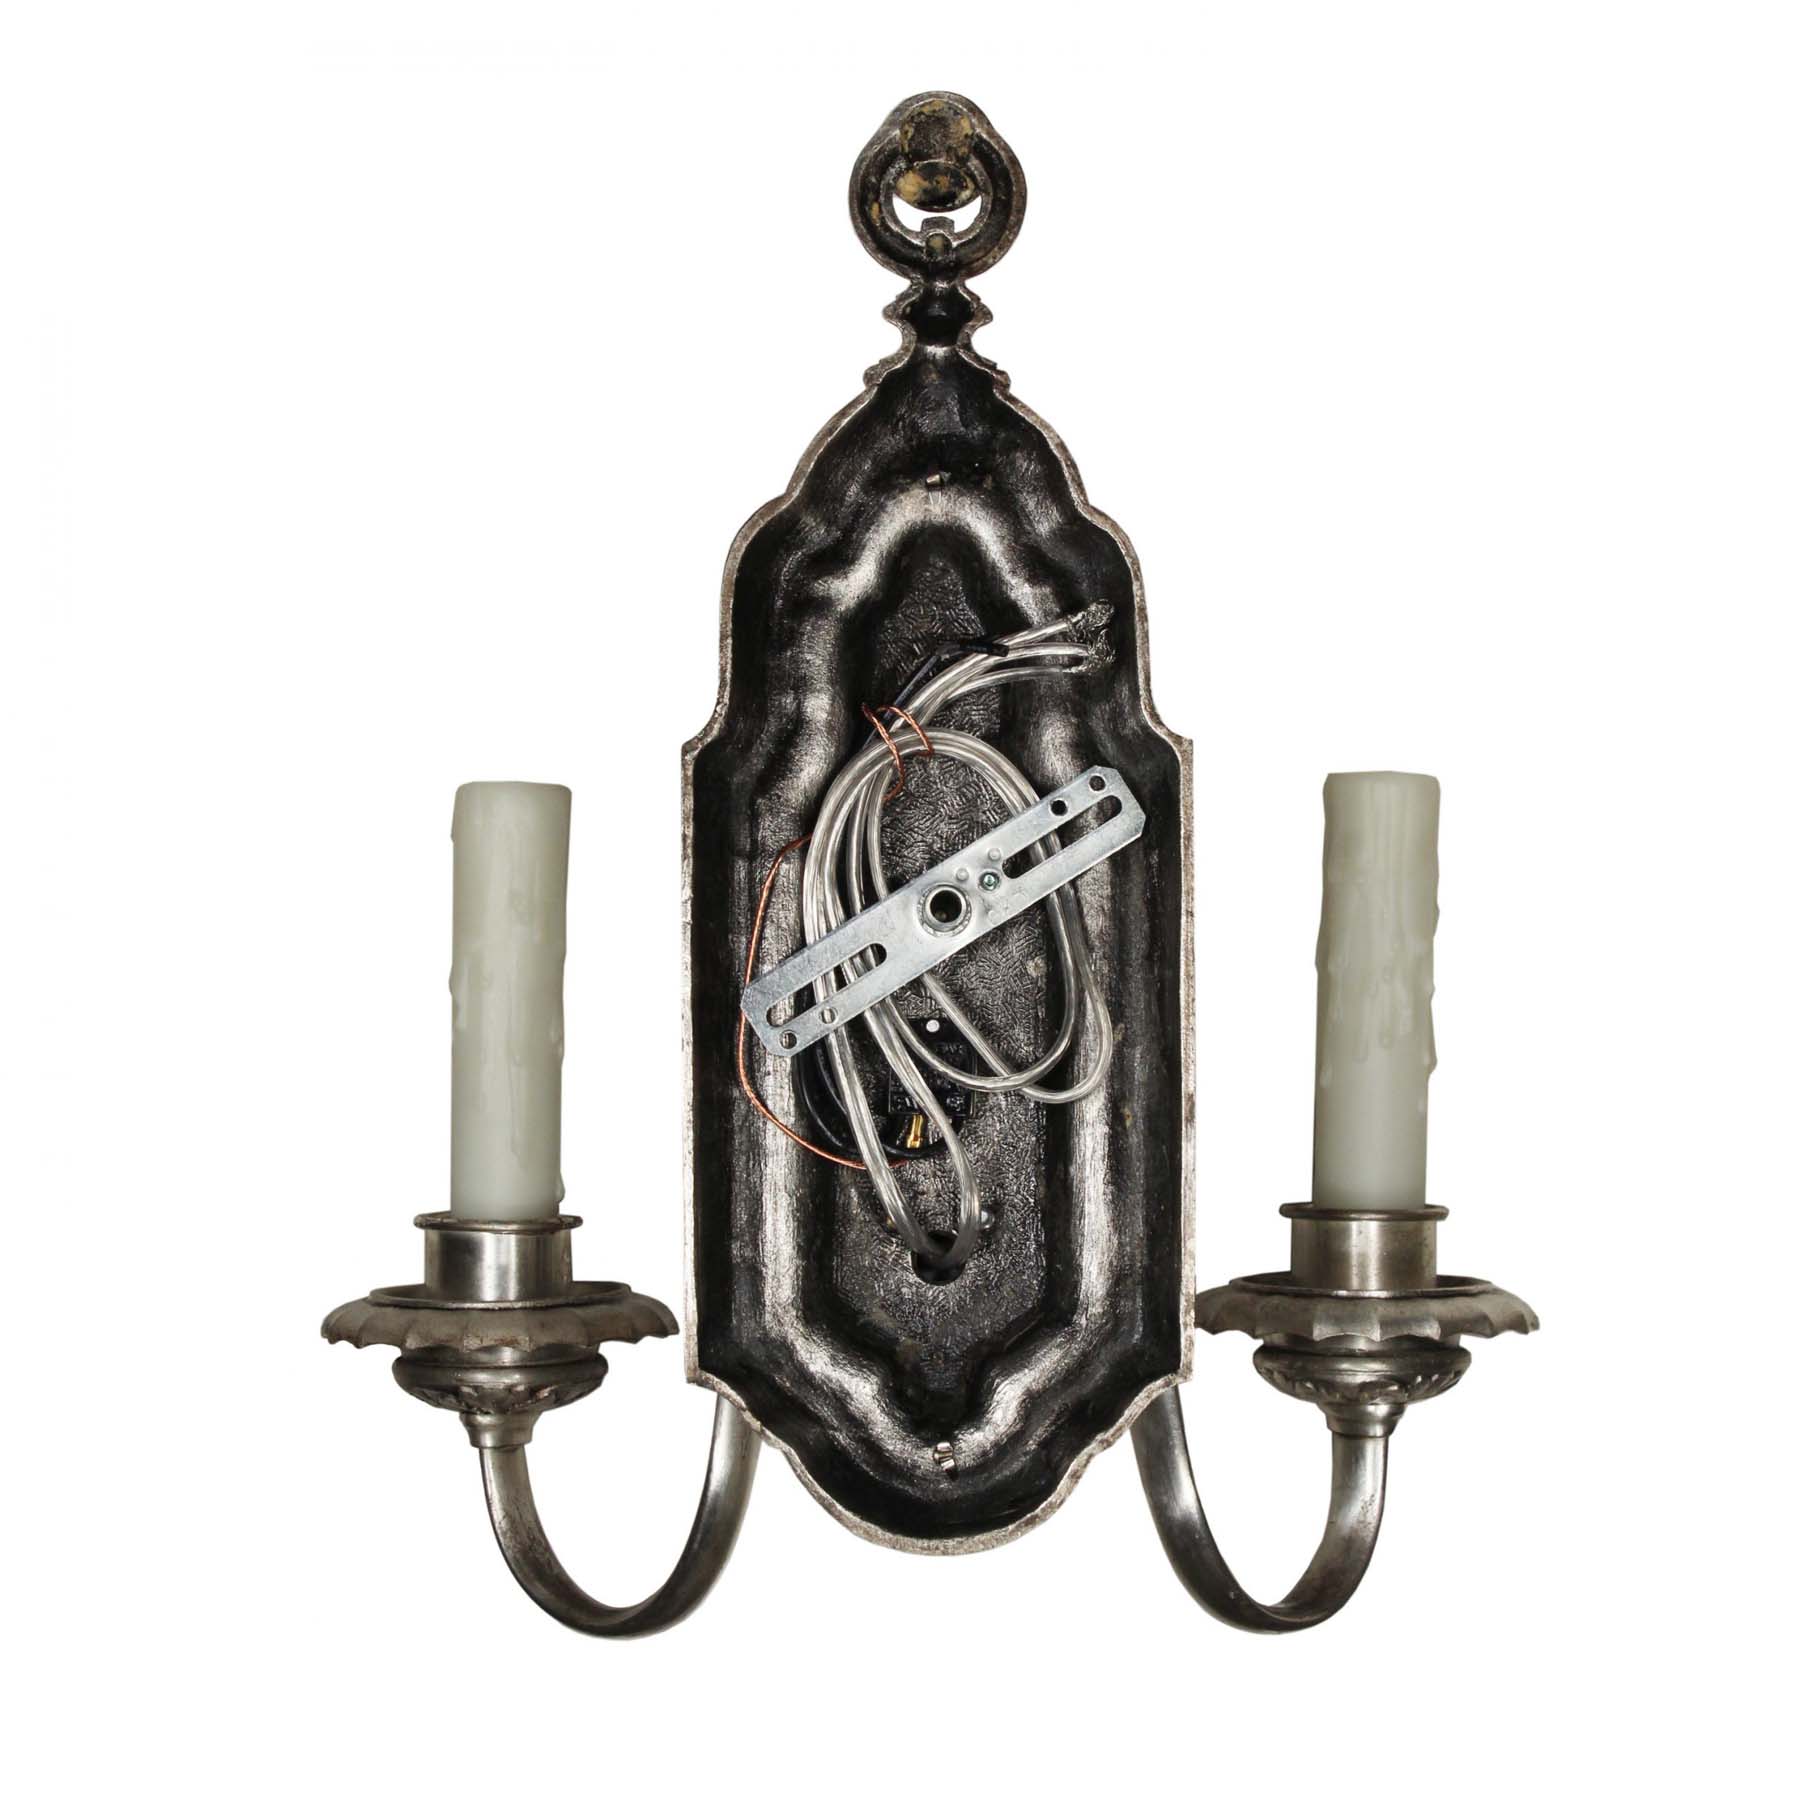 Pair of Silver Plated Neoclassical Sconces Signed Edward Miller, Antique Lighting-64362